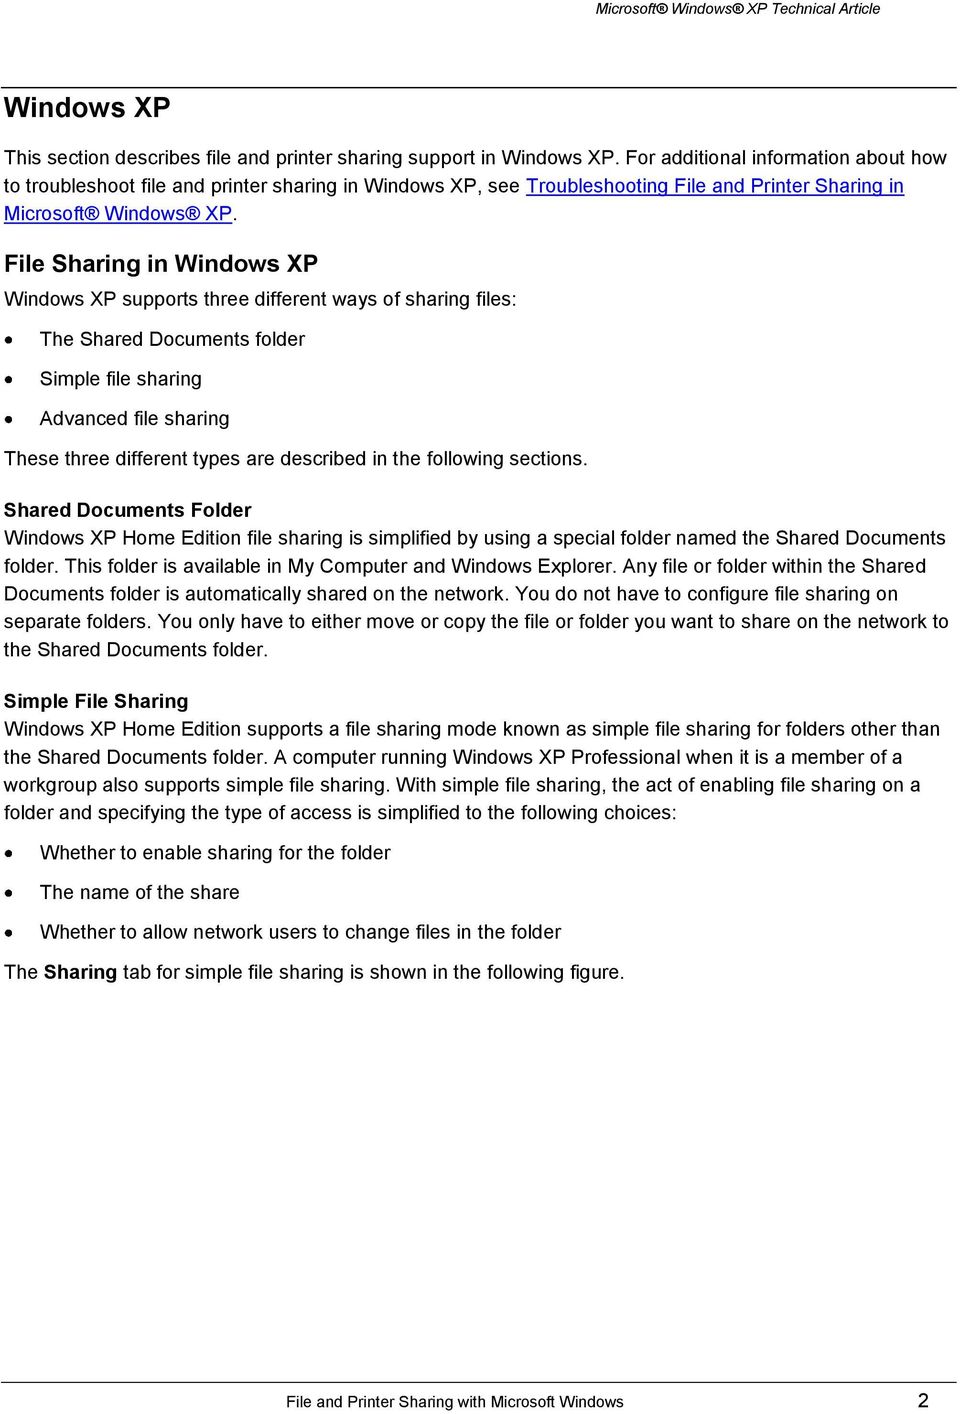 File Sharing in Windows XP Windows XP supports three different ways of sharing files: The Shared Documents folder Simple file sharing Advanced file sharing These three different types are described